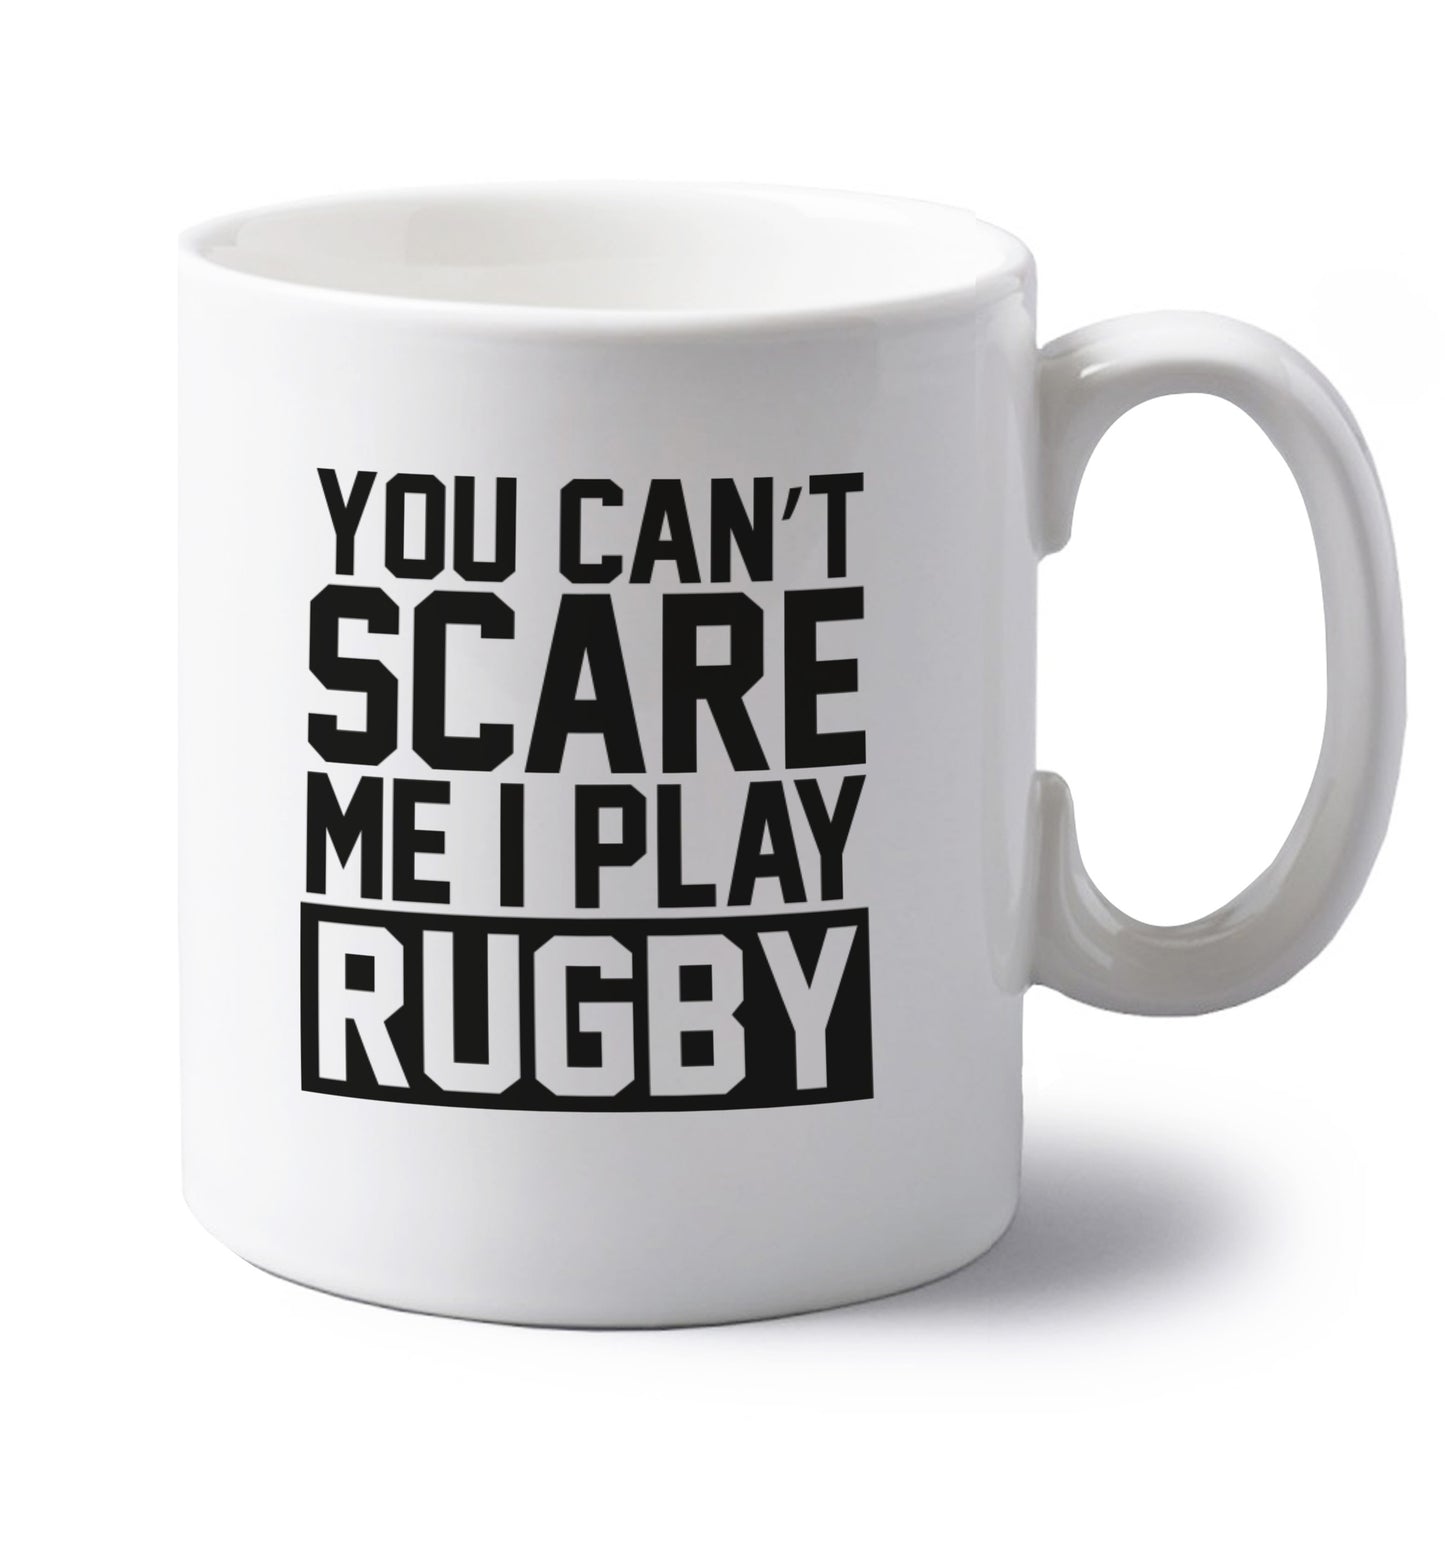 You can't scare me I play rugby left handed white ceramic mug 